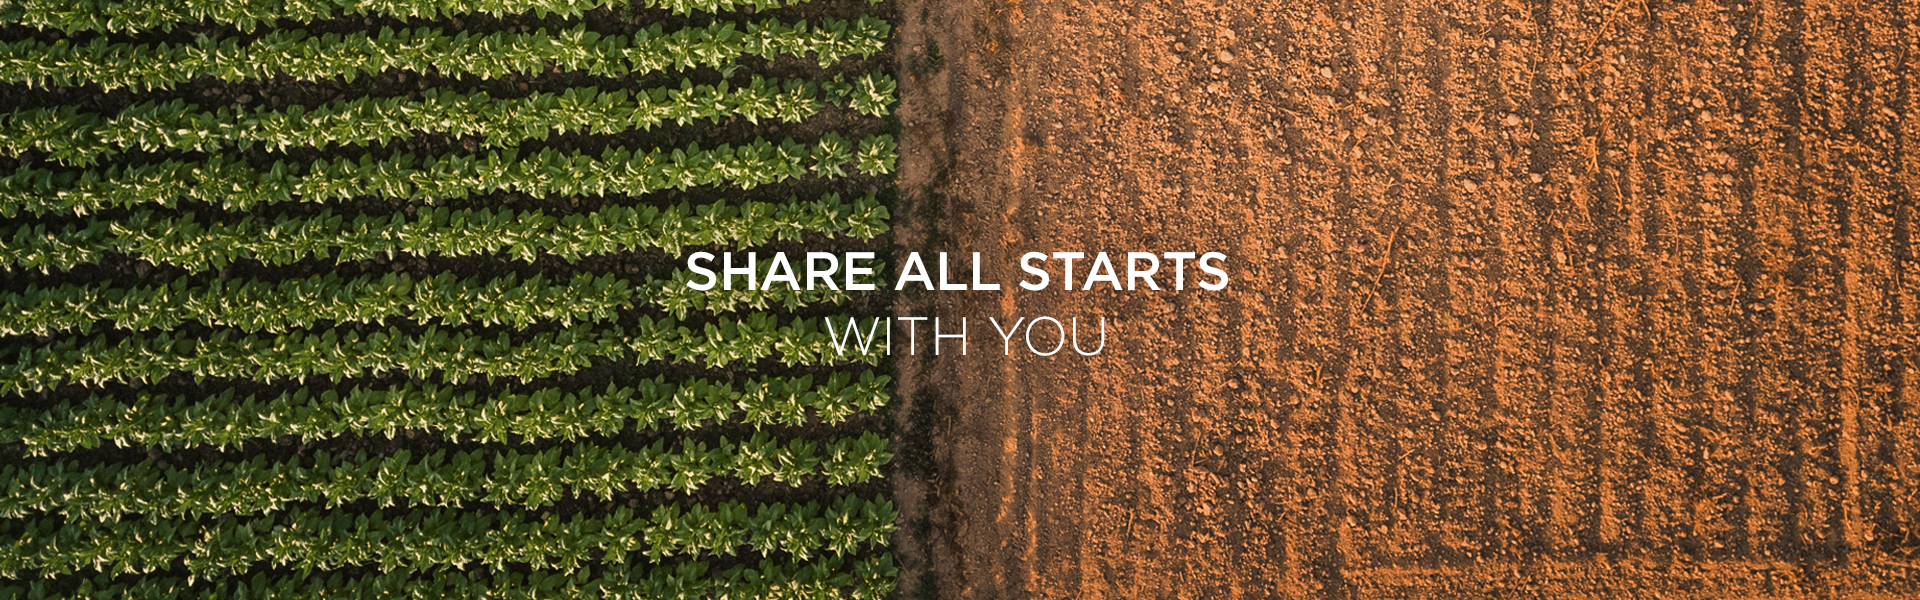 Share all starts